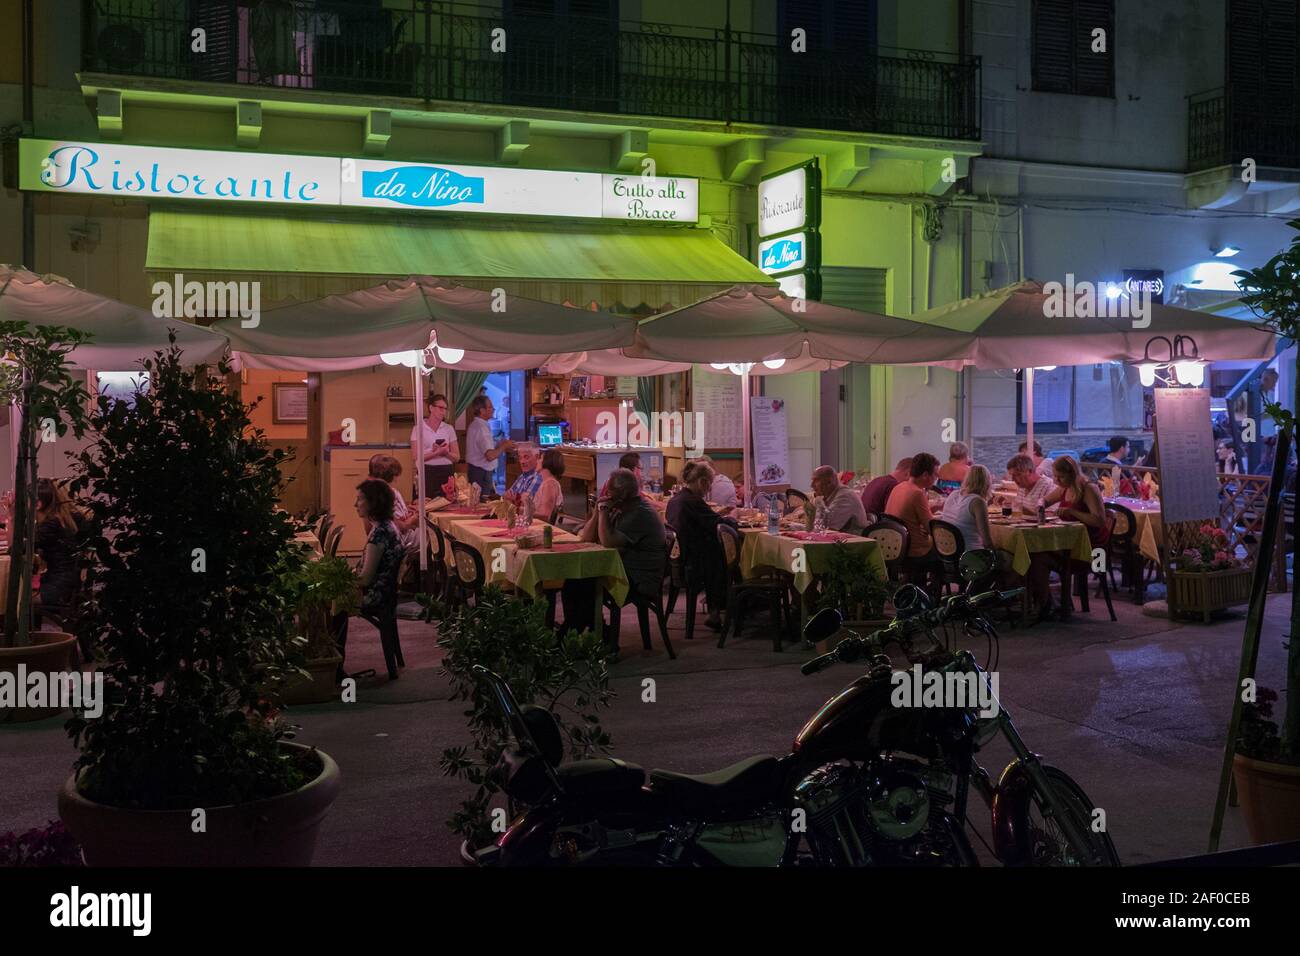 Restaurant by night in Cefalù, Sicily. Historic Cefalù is a major tourist destination on Sicily. Stock Photo